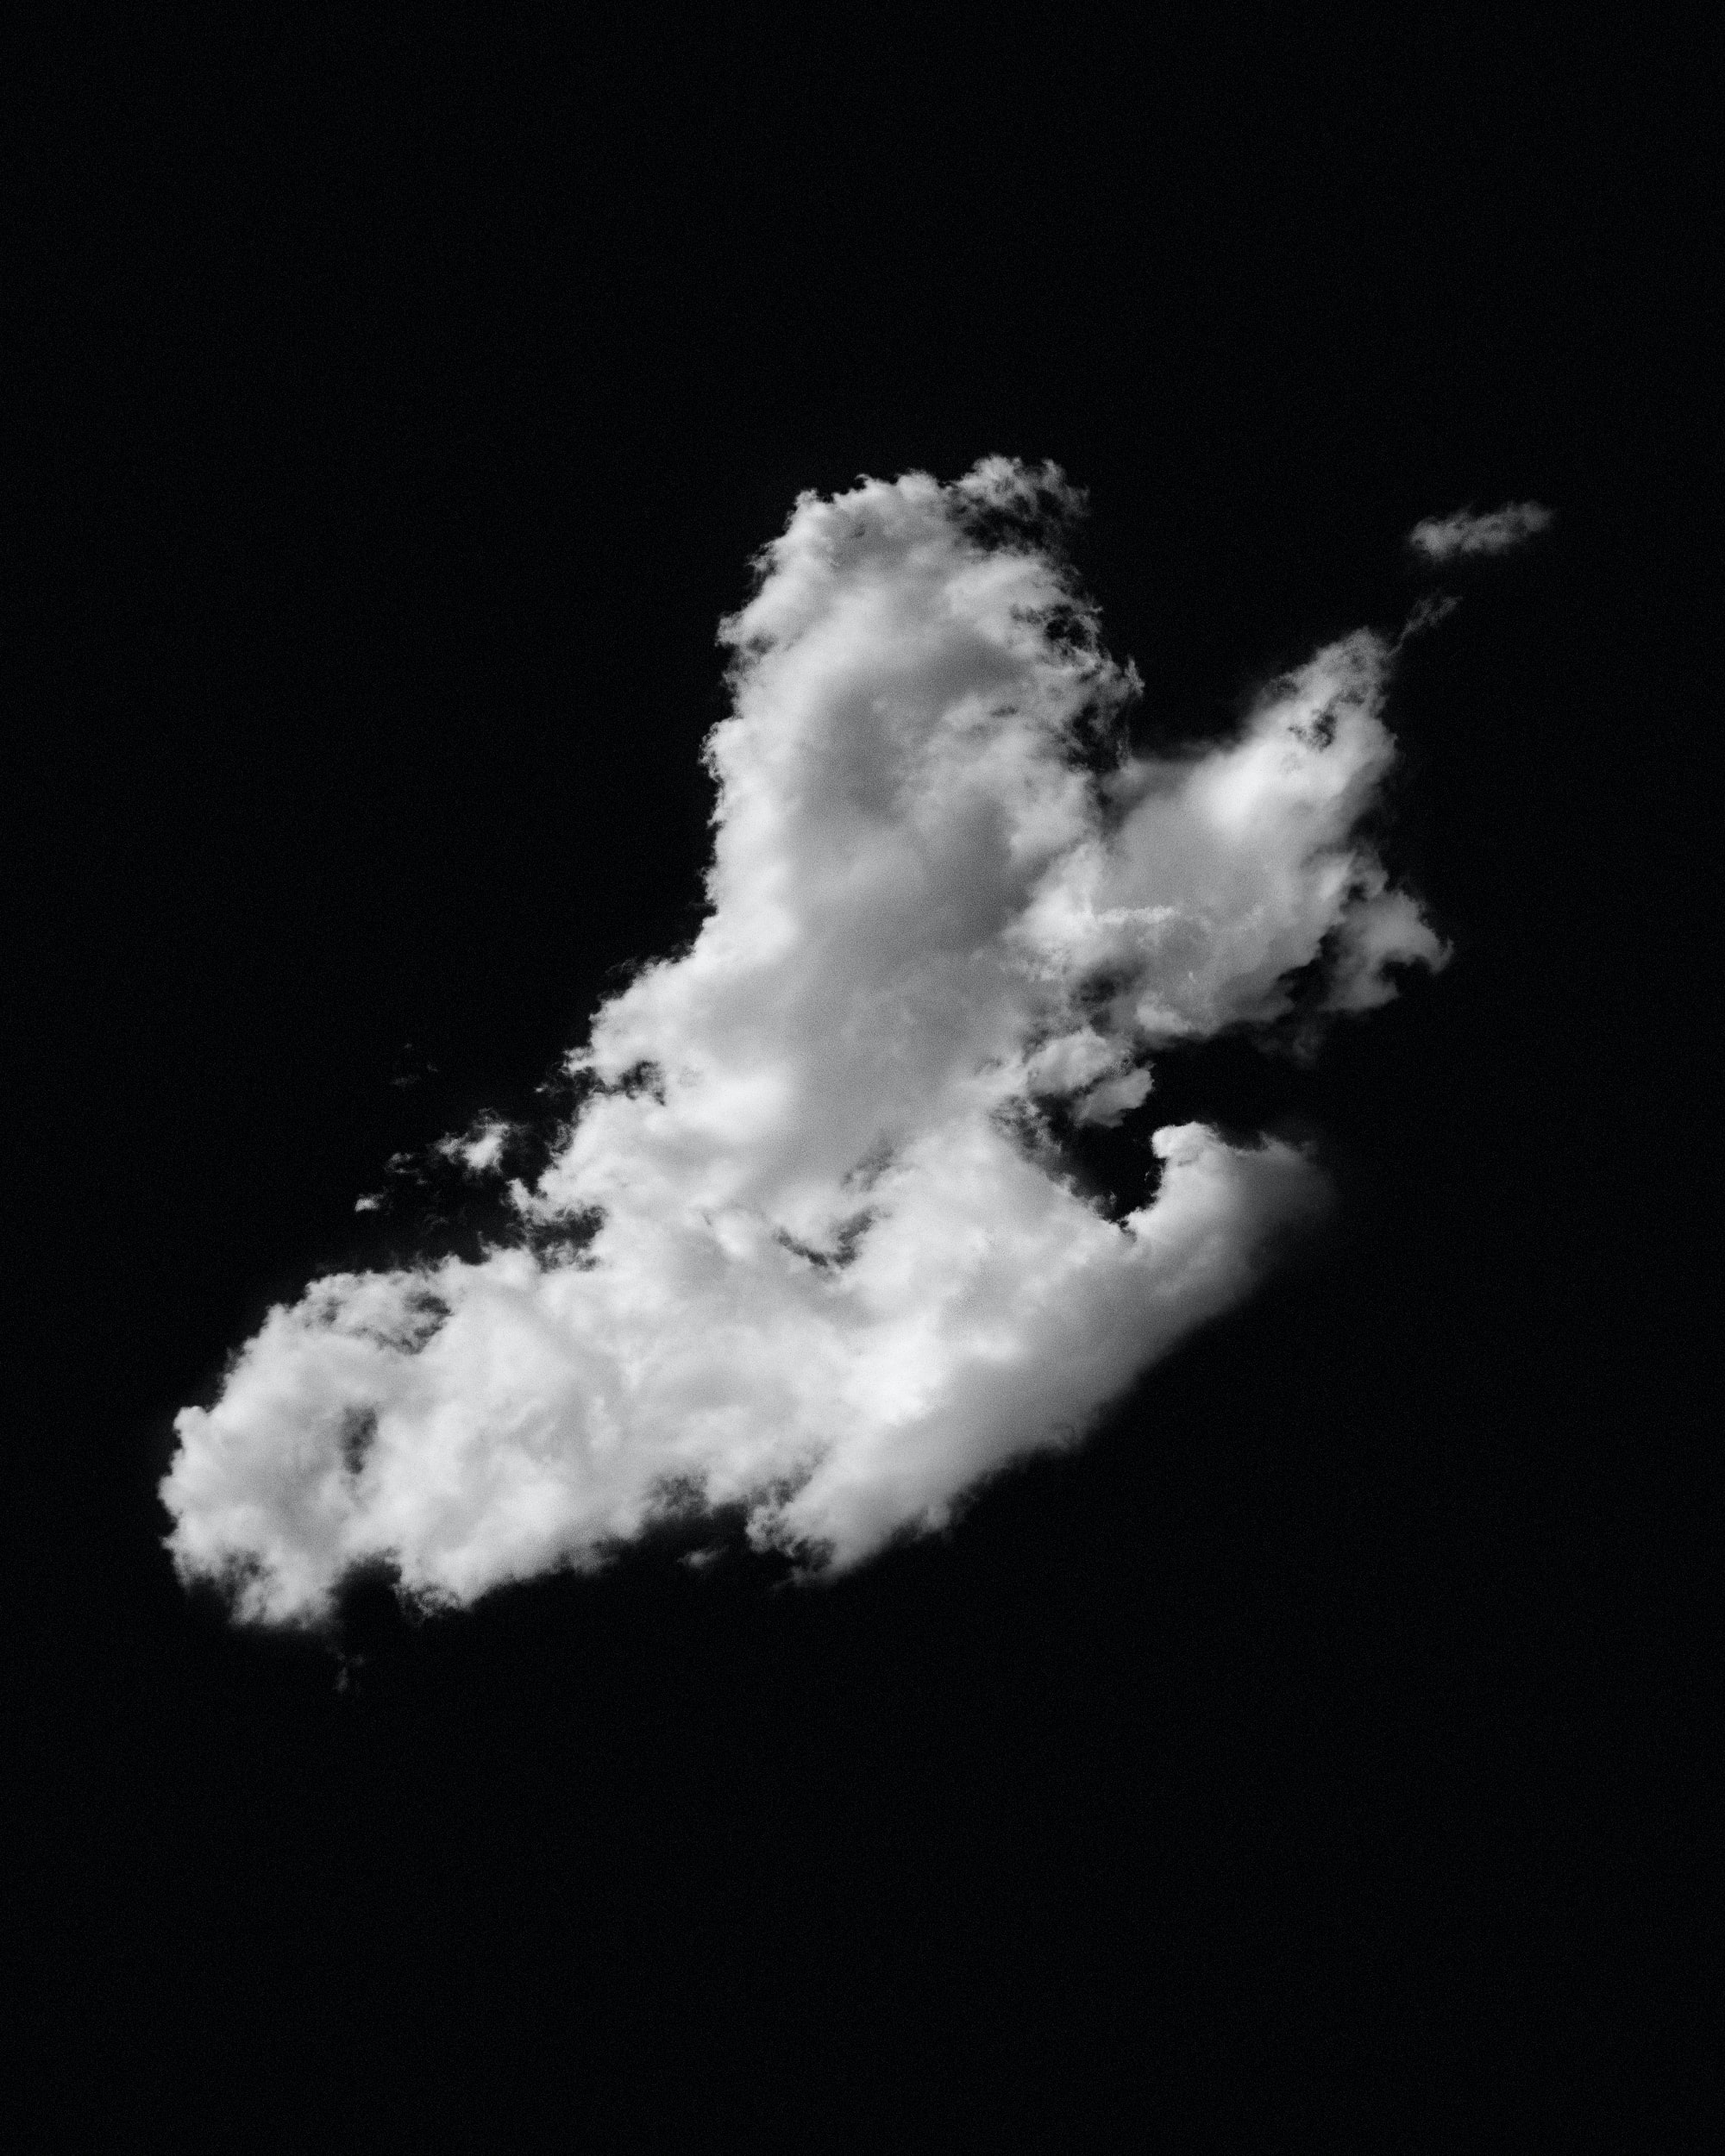 image of a lone cloud on a black background